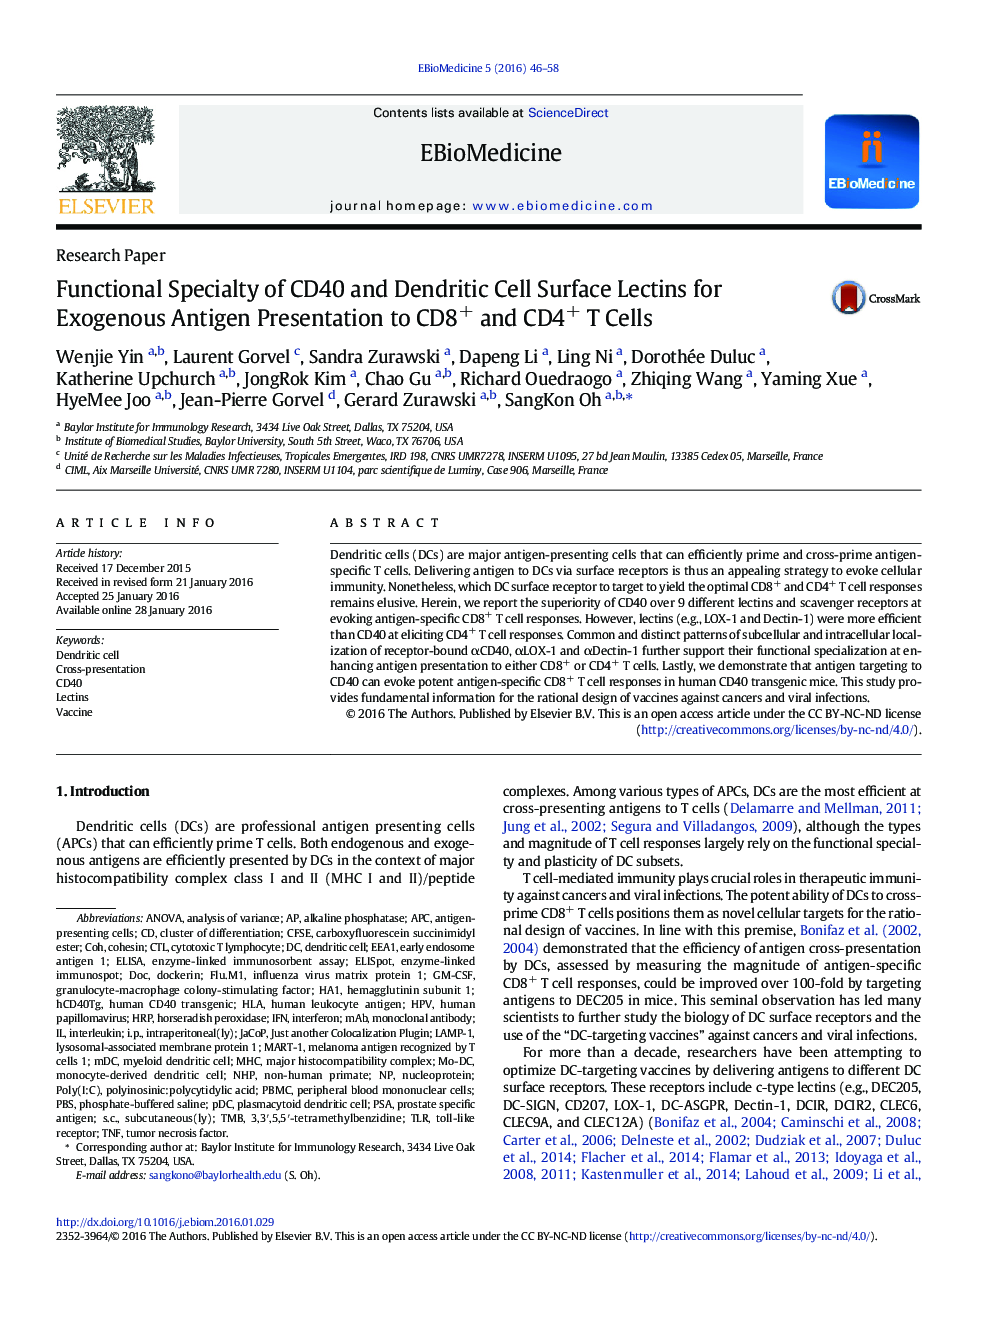 Functional Specialty of CD40 and Dendritic Cell Surface Lectins for Exogenous Antigen Presentation to CD8+ and CD4+ T Cells